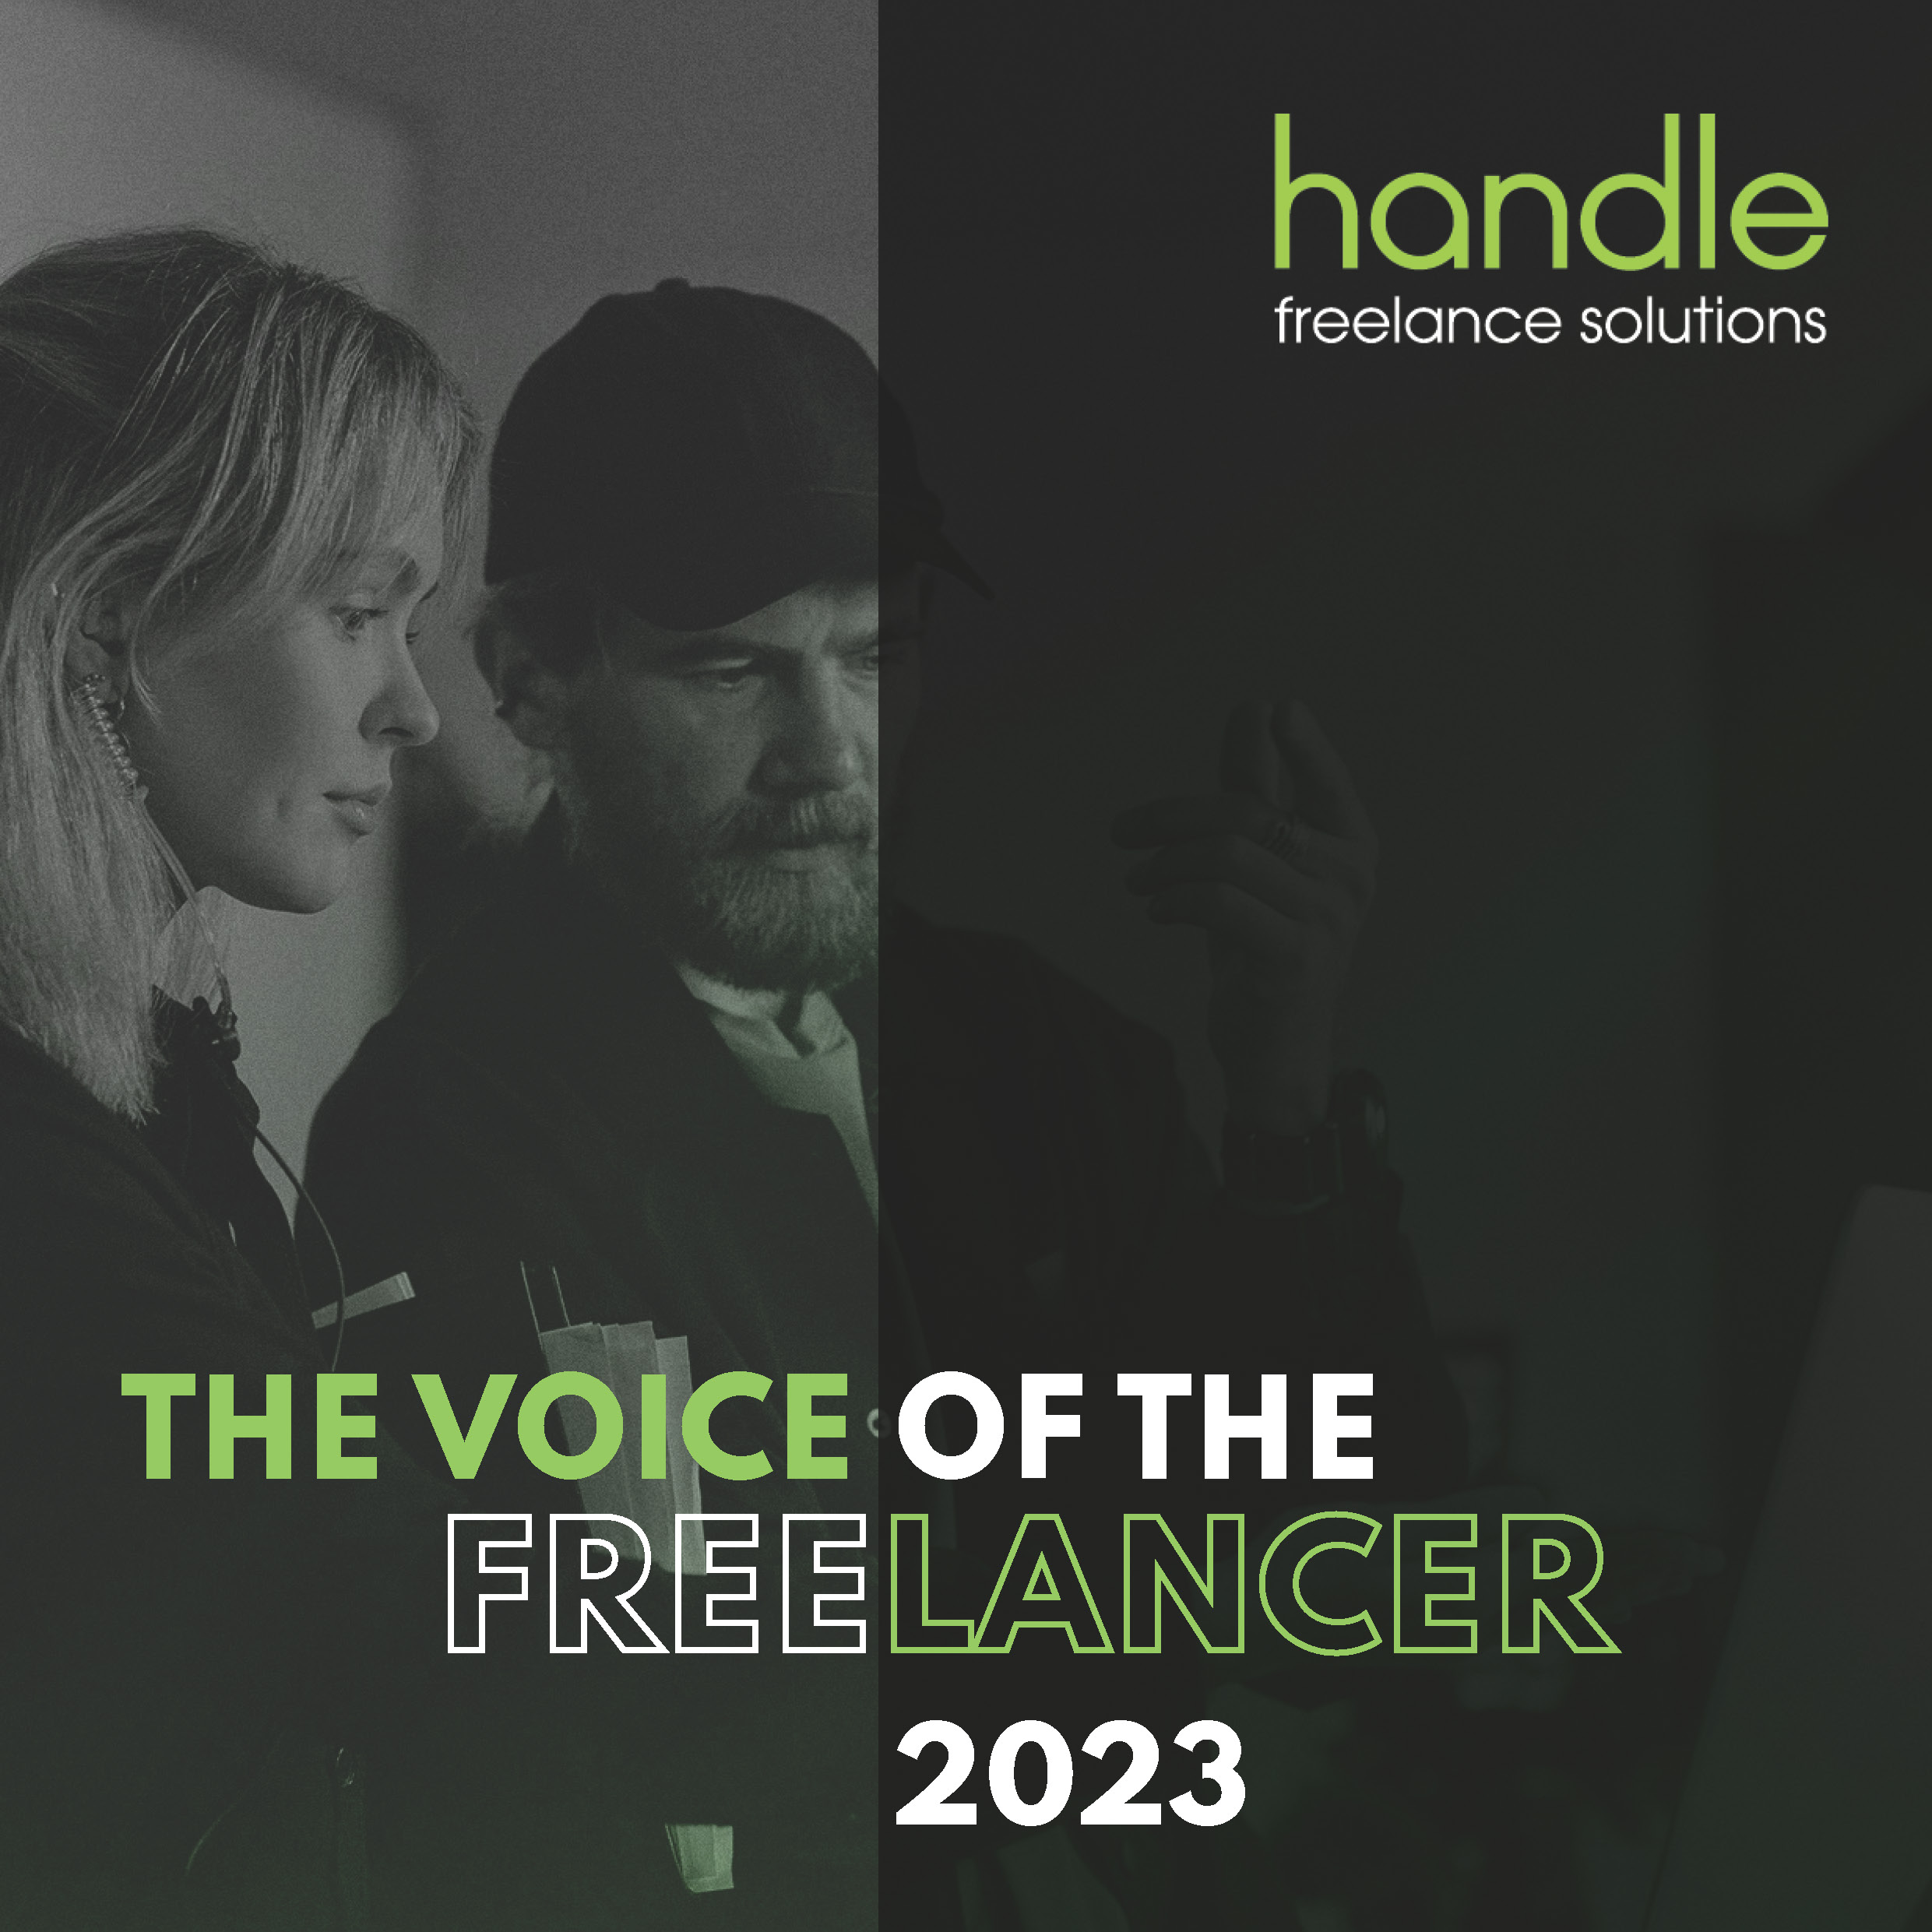 The Voice of the Freelancer 2023